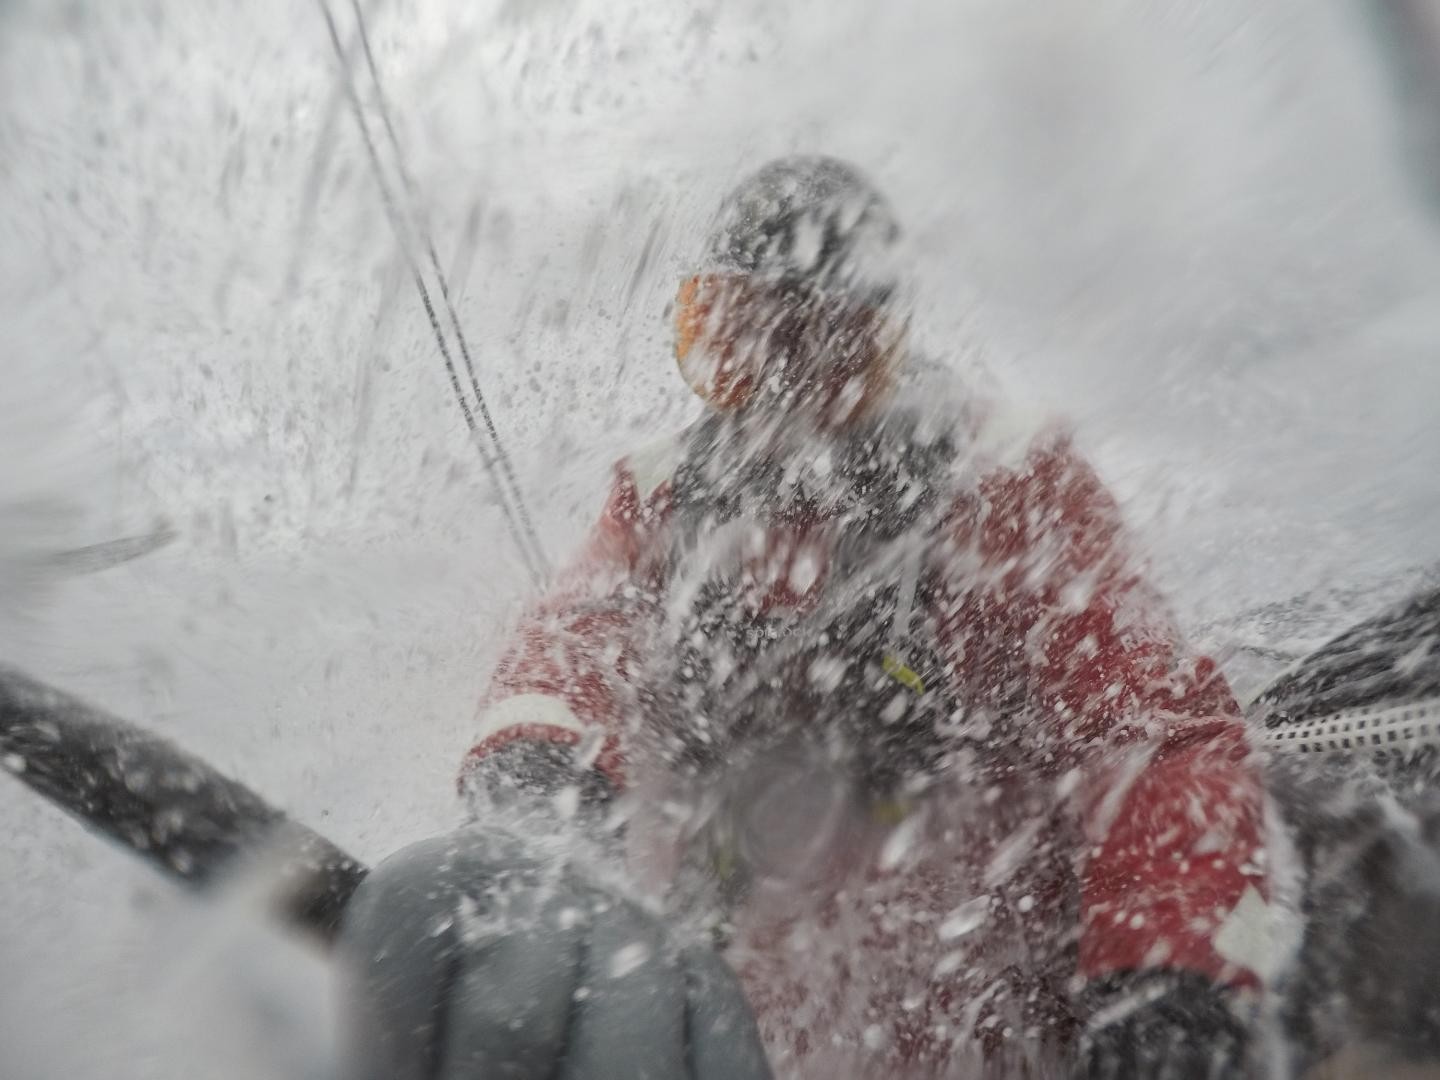 Leg 3, Cape Town to Melbourne, Day 5, David Witt is in there somewhere on the wheel on board Sun Hung Kai/Scallywag.